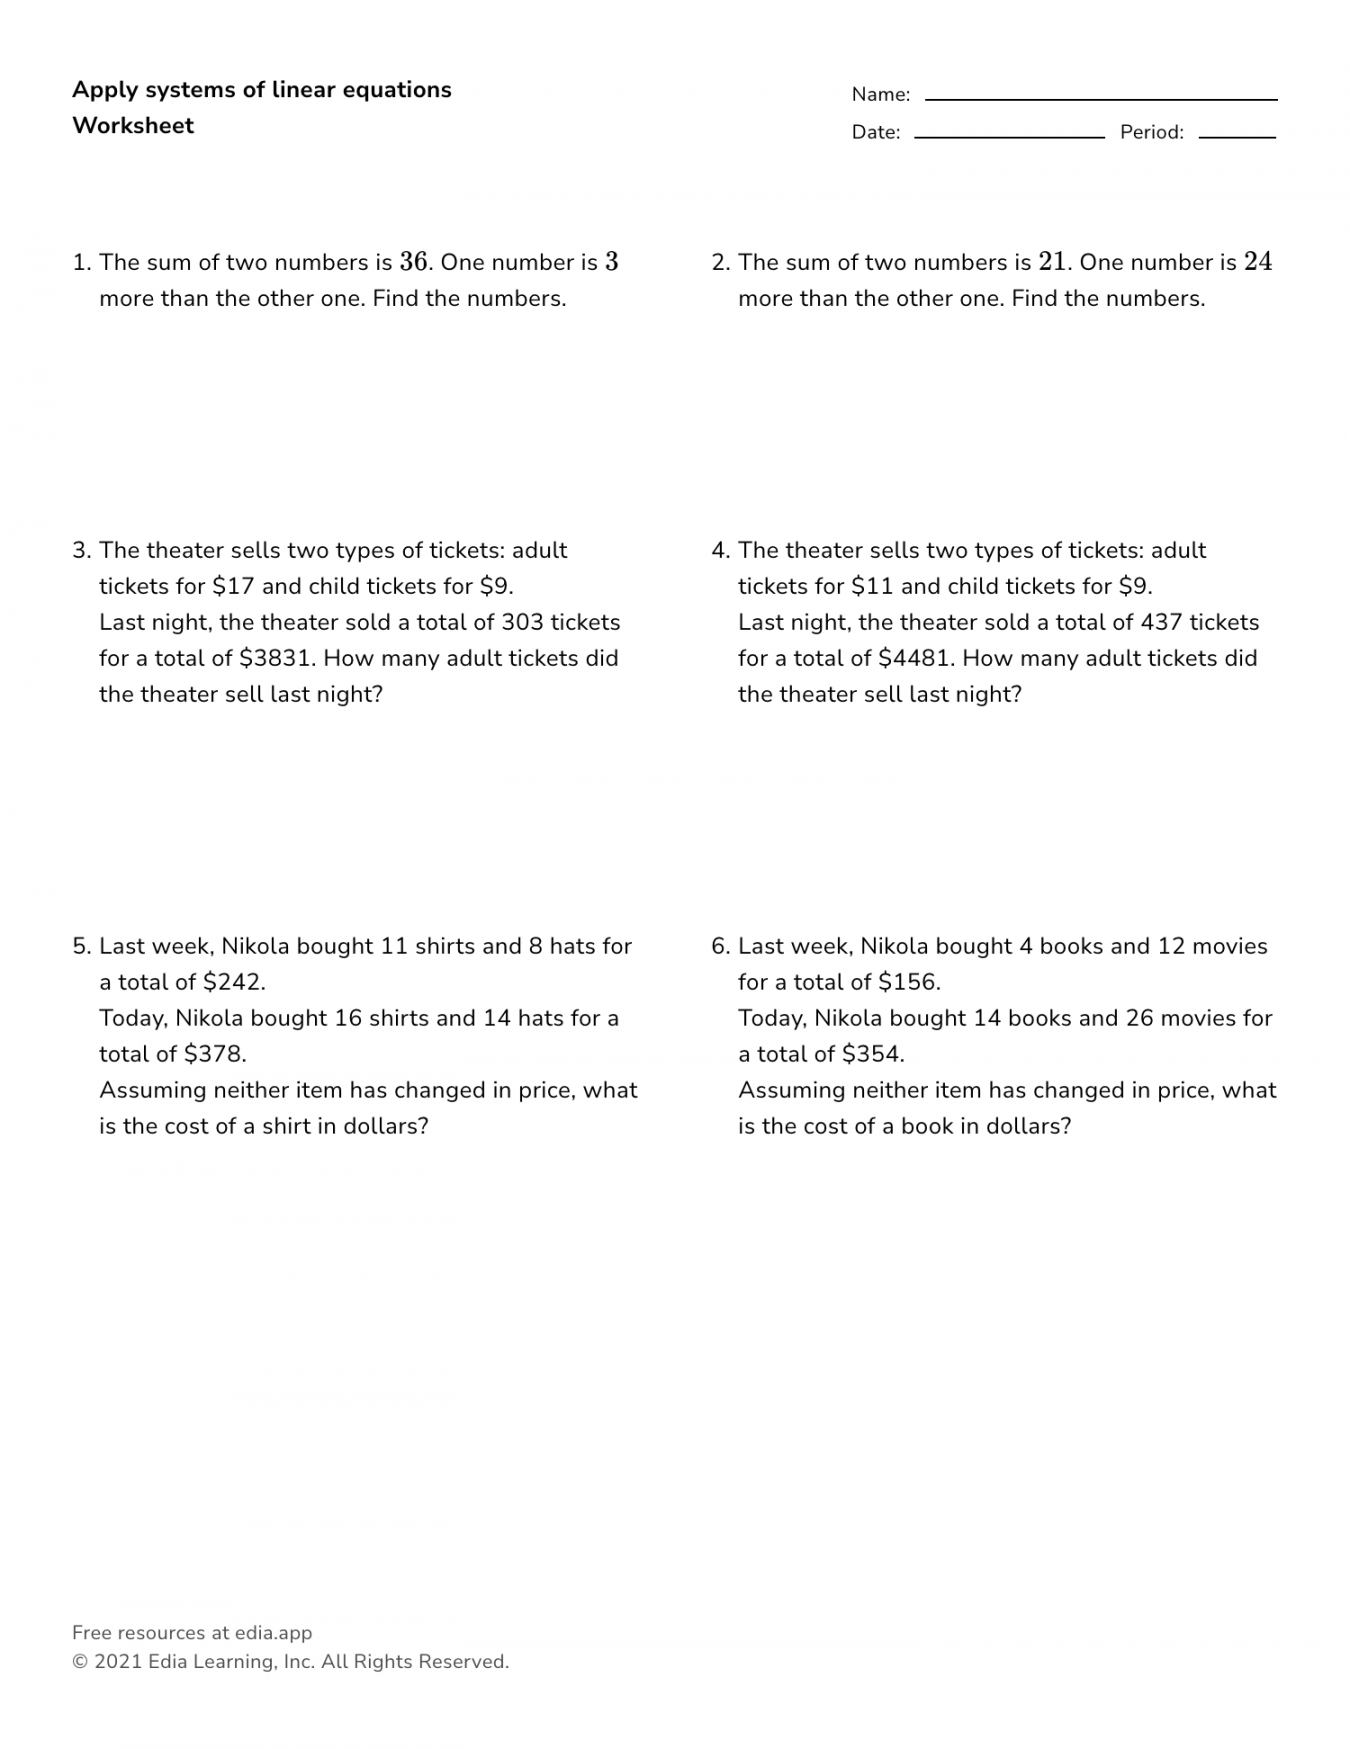 Apply Systems Of Linear Equations - Worksheet